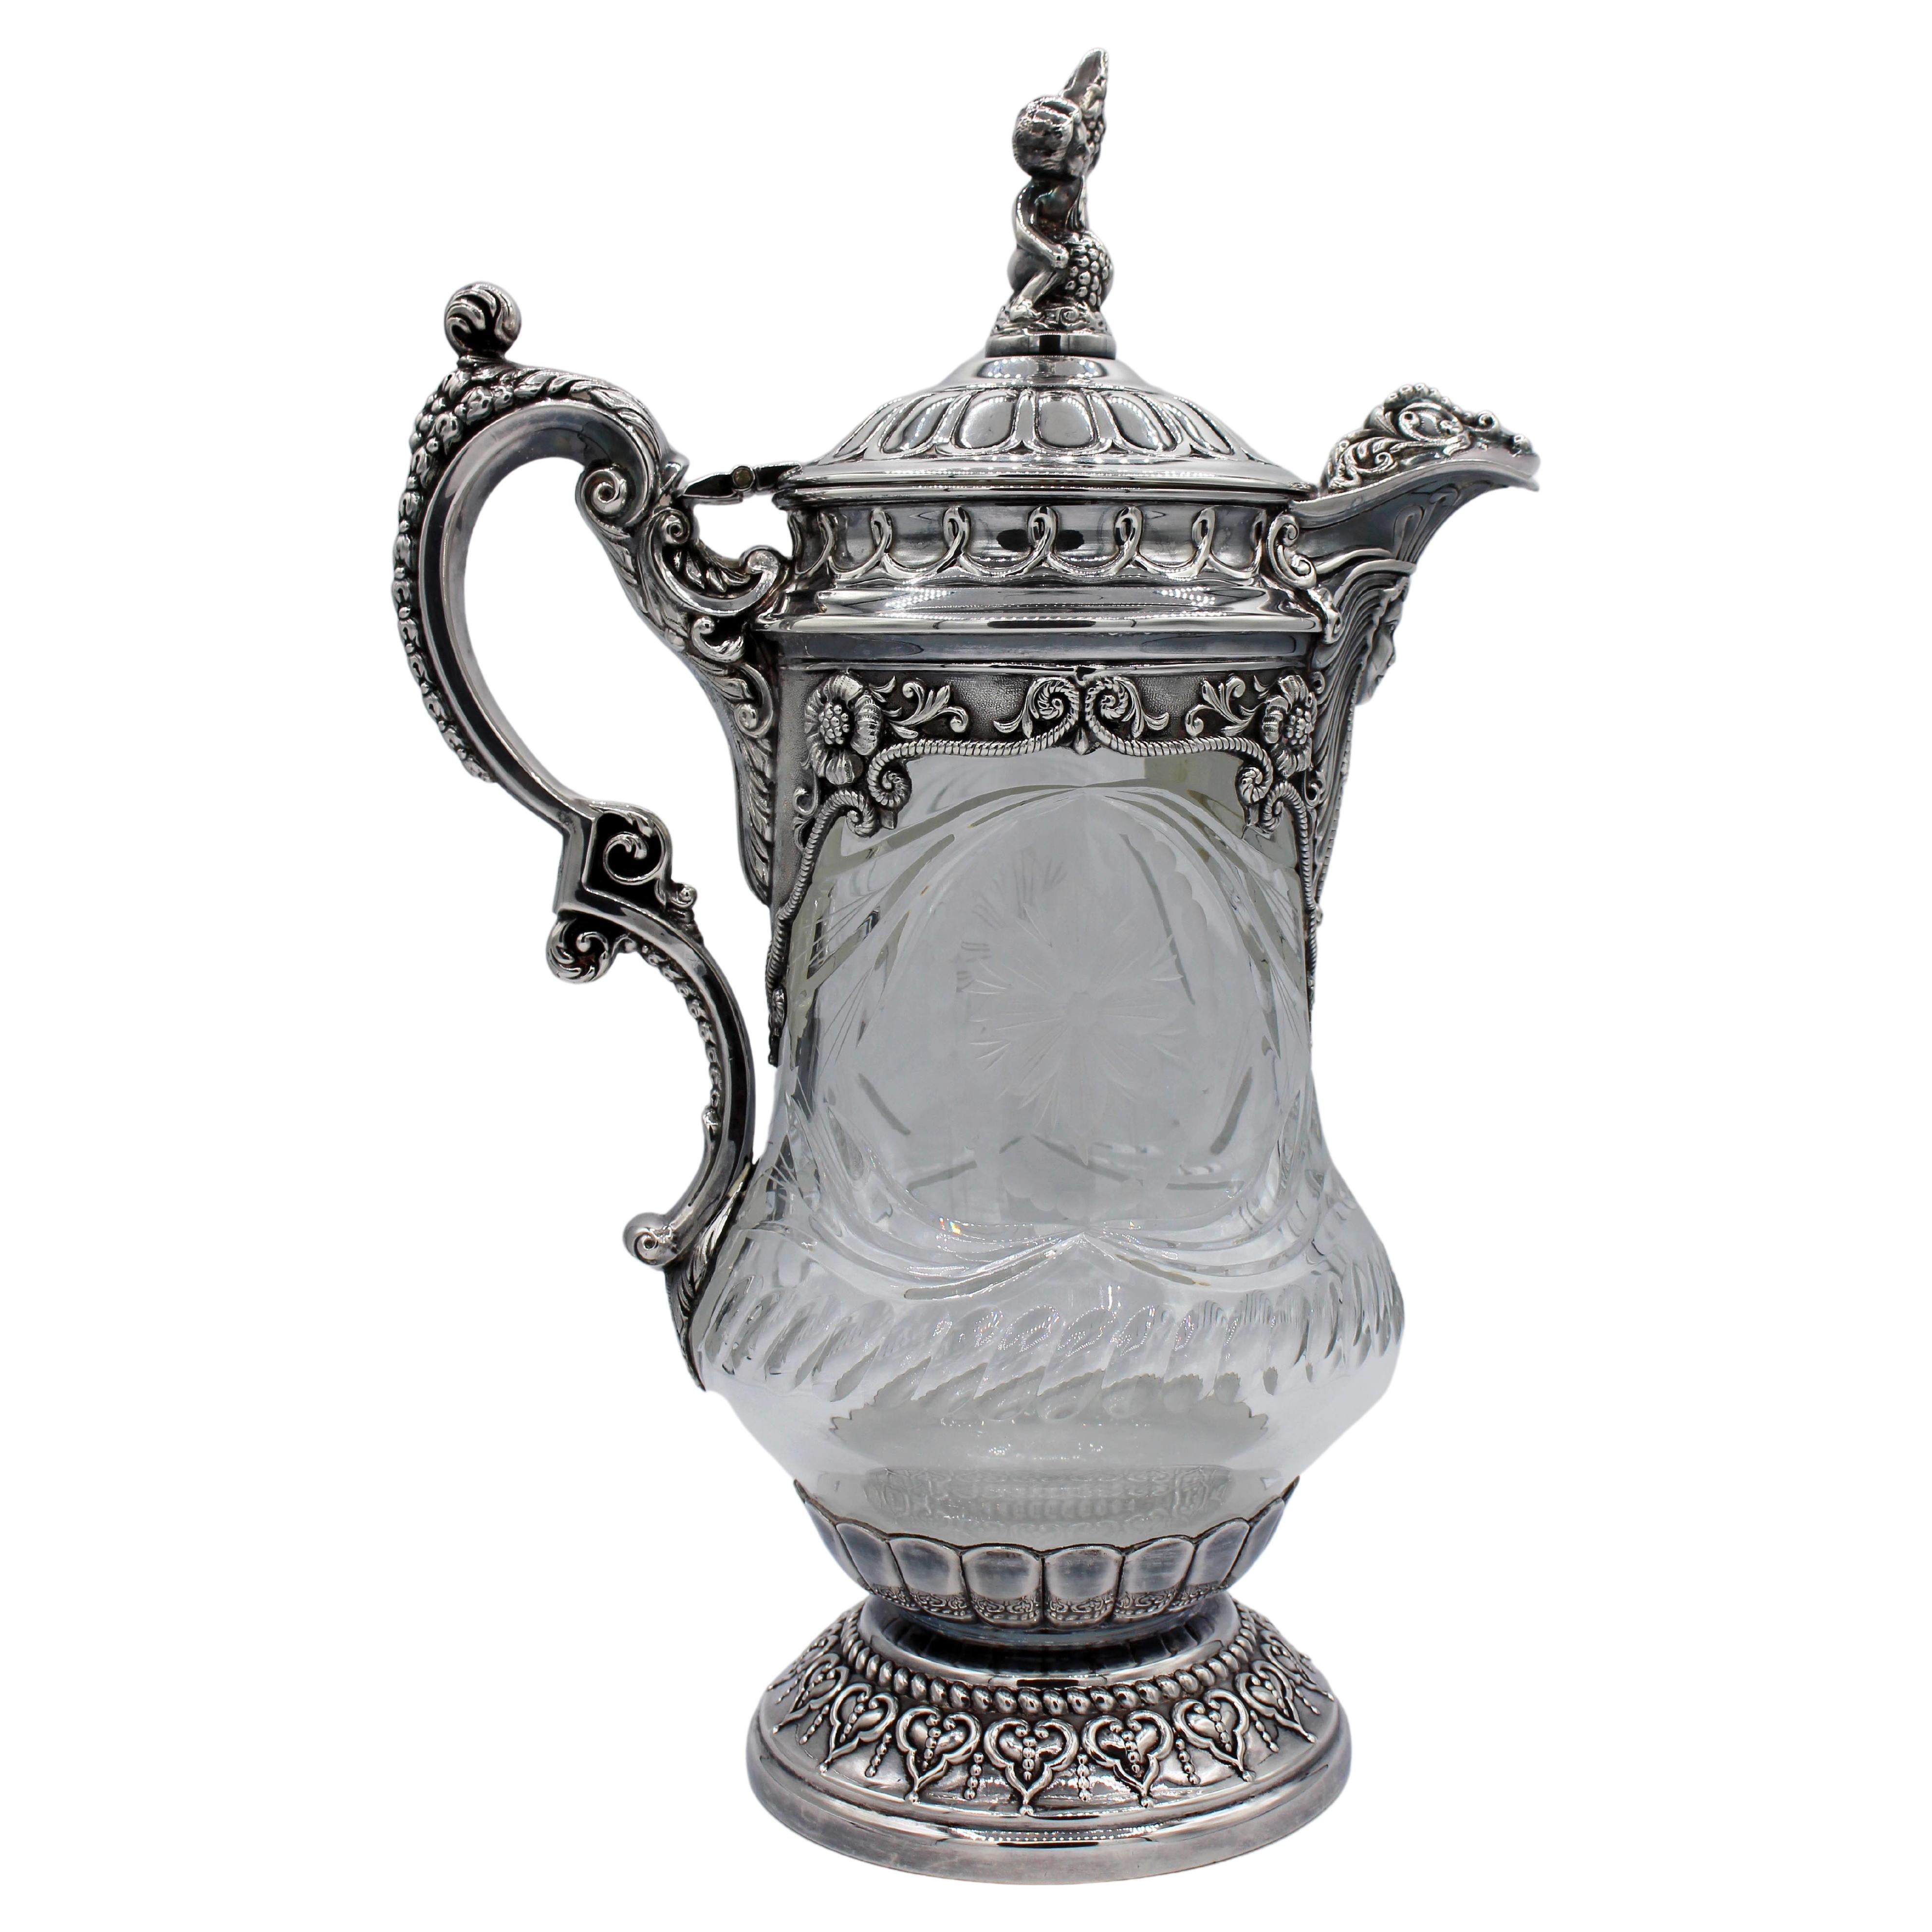 Circa 1890s Silver-Plated & Cut Glass Wine or Water Flagon by Topázio, Portugues